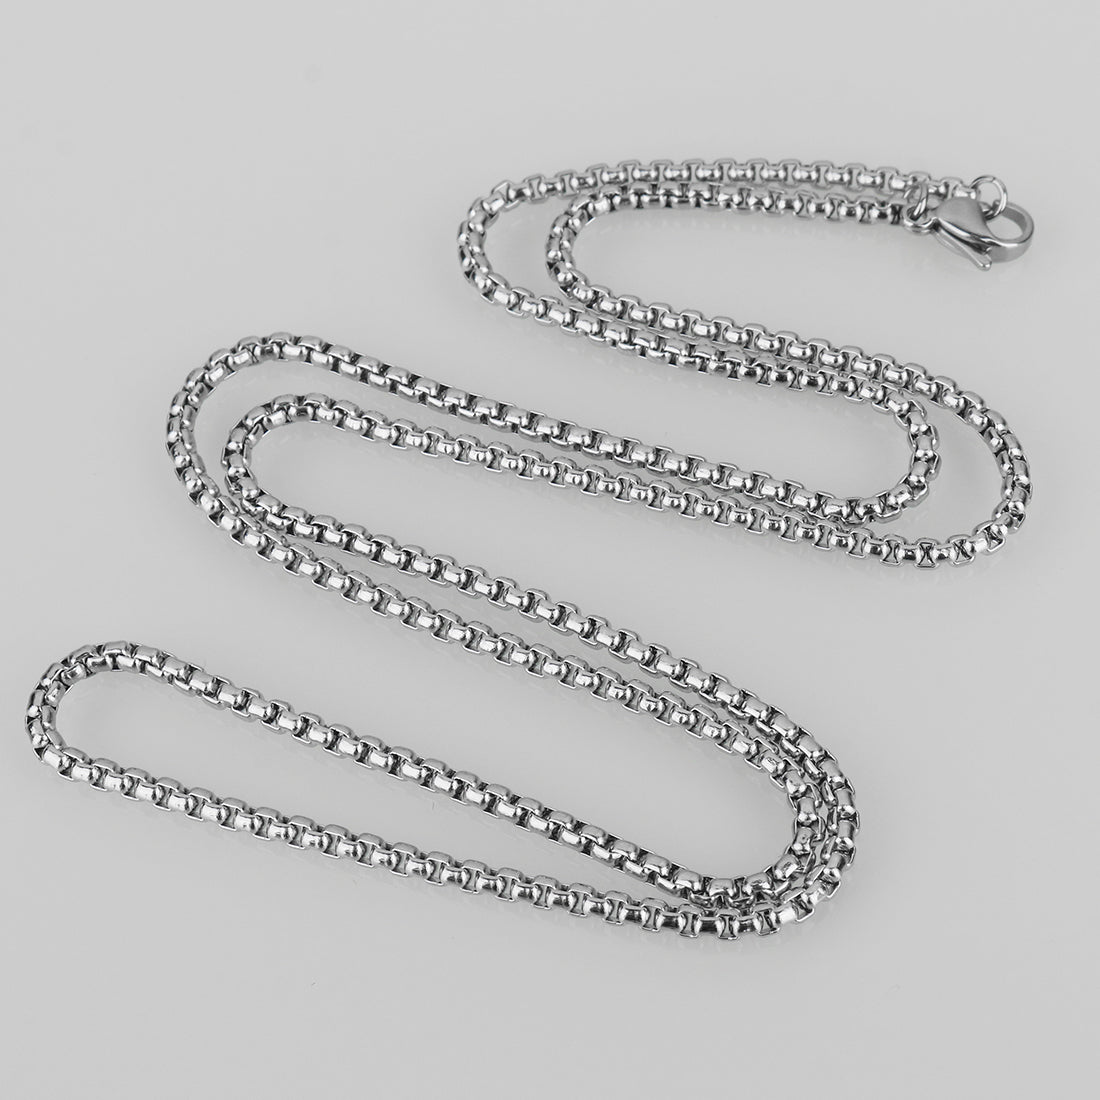 Stainless Steel Box Chain Necklace 2.5mm - Length 80cm - 31.5 inch - China - NEW822